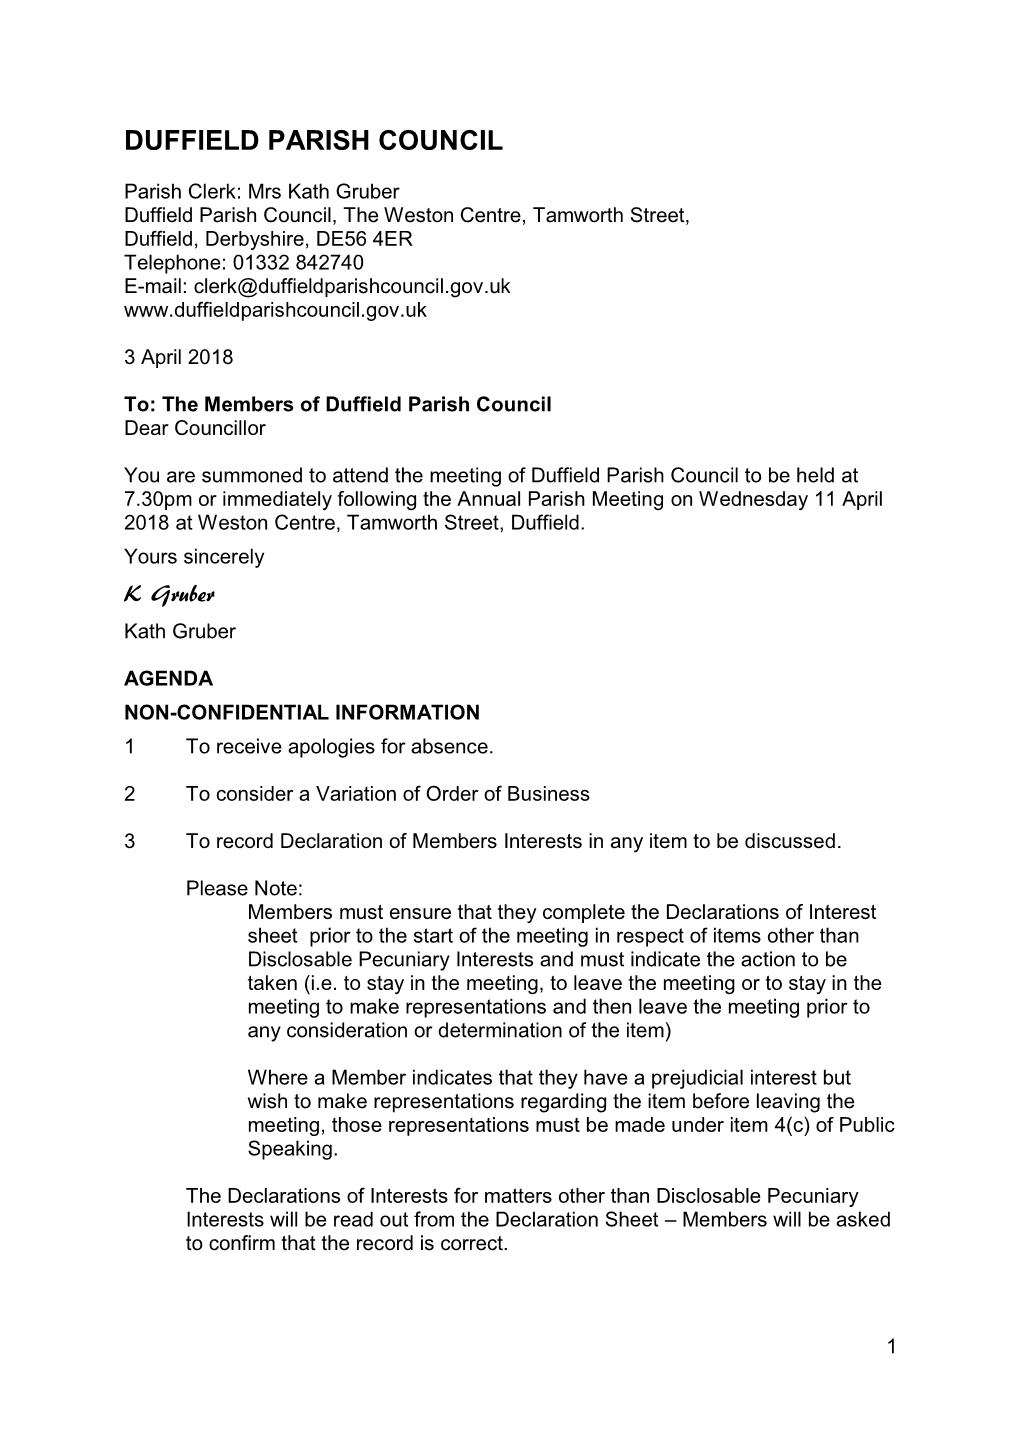 Agenda for Full Council Meeting 11Th April 2018